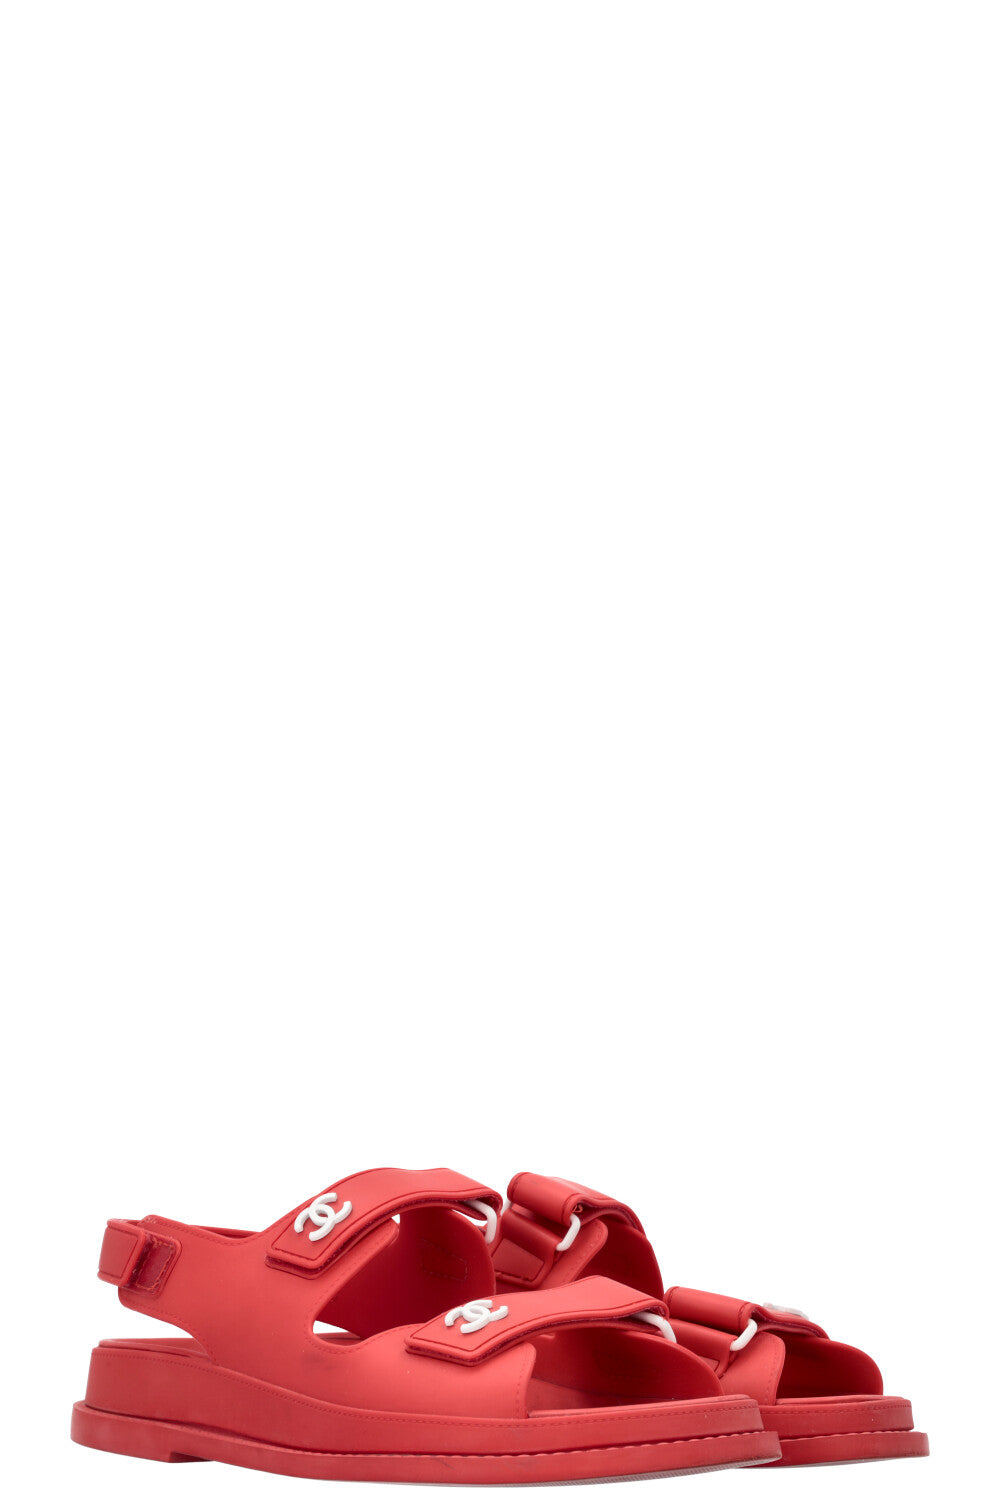 CHANEL Dad Sandals Rubber Red